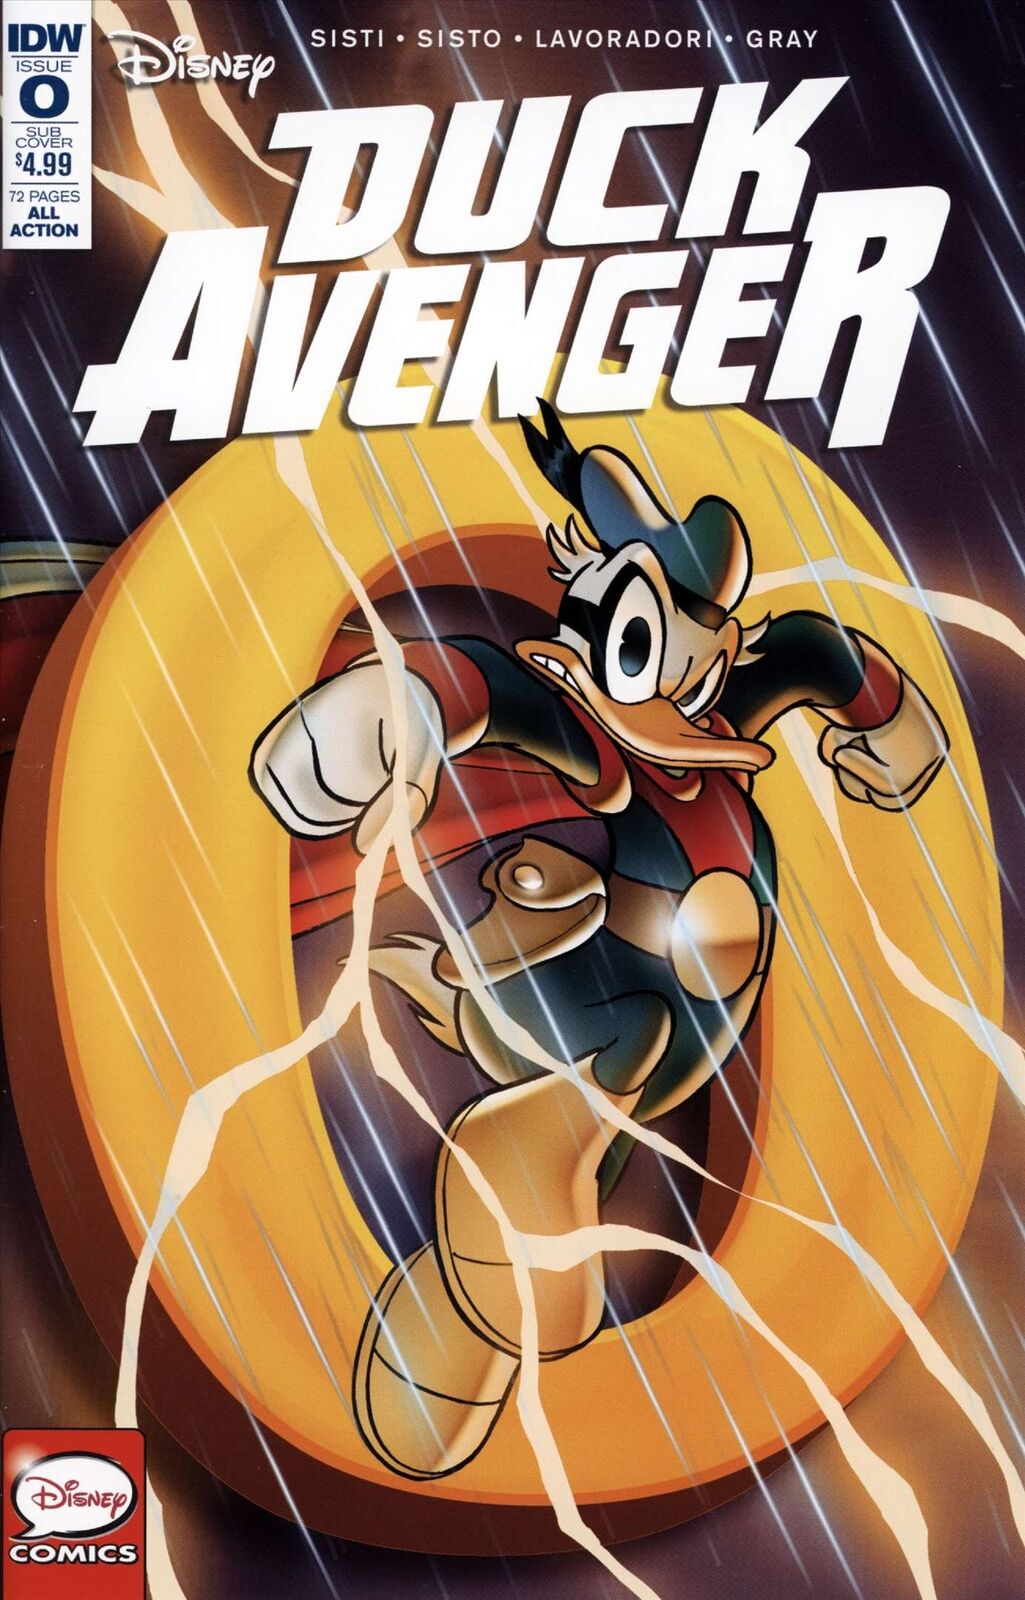 Duck Avenger #0A VF/NM; IDW | Sub Disney Donald Duck - we combine shipping